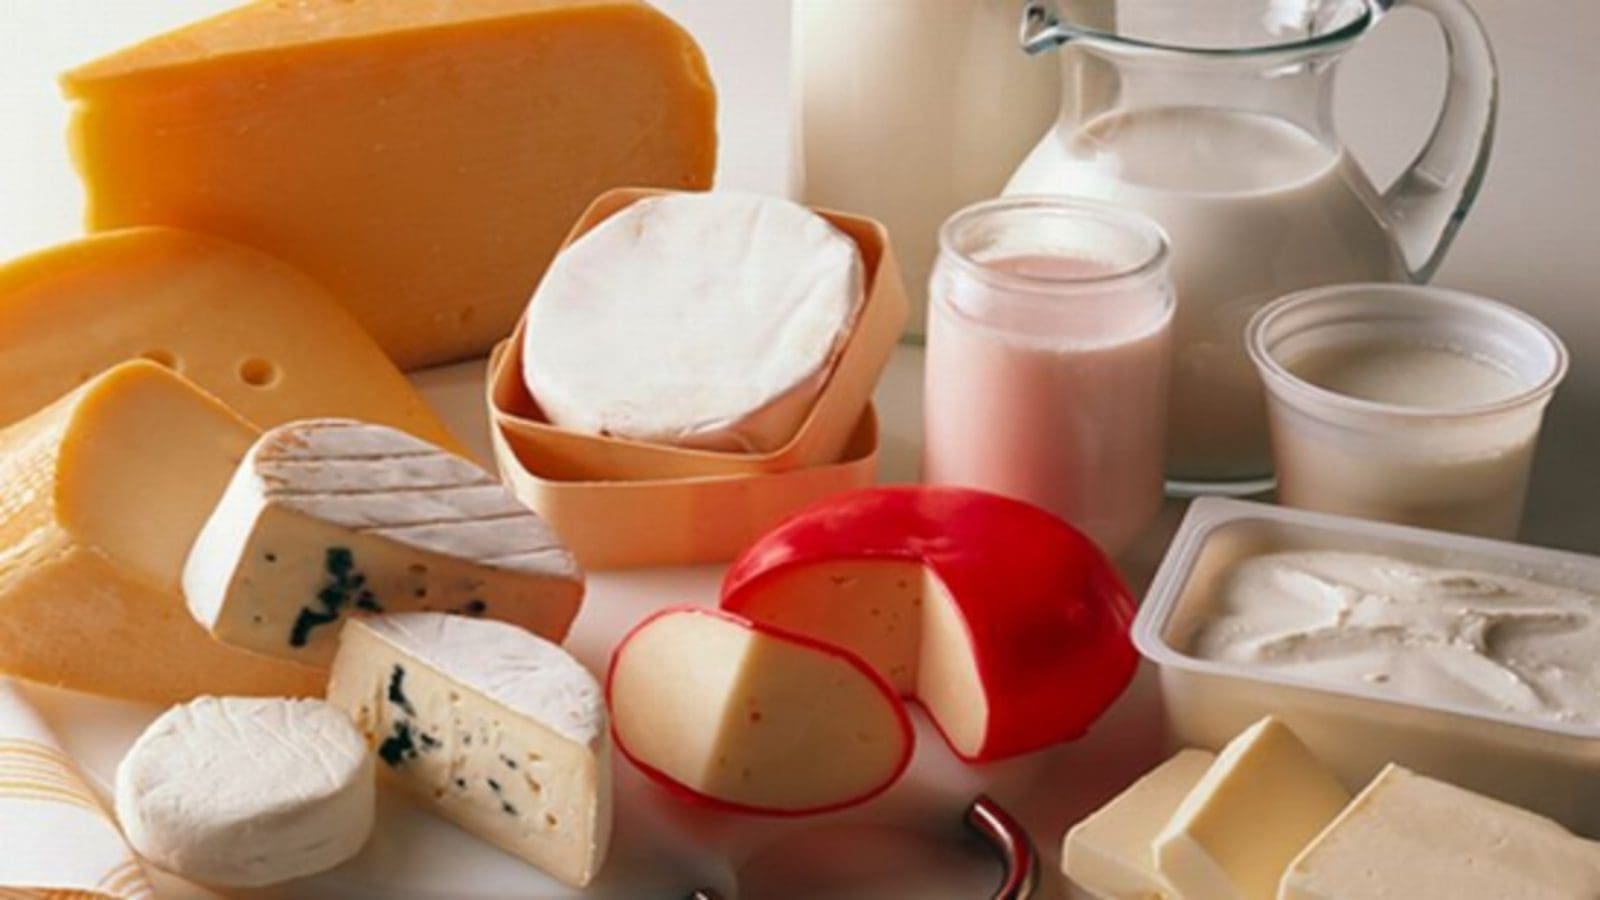 European Commission’s audits reveal food safety gaps in Romania, Finland dairy products